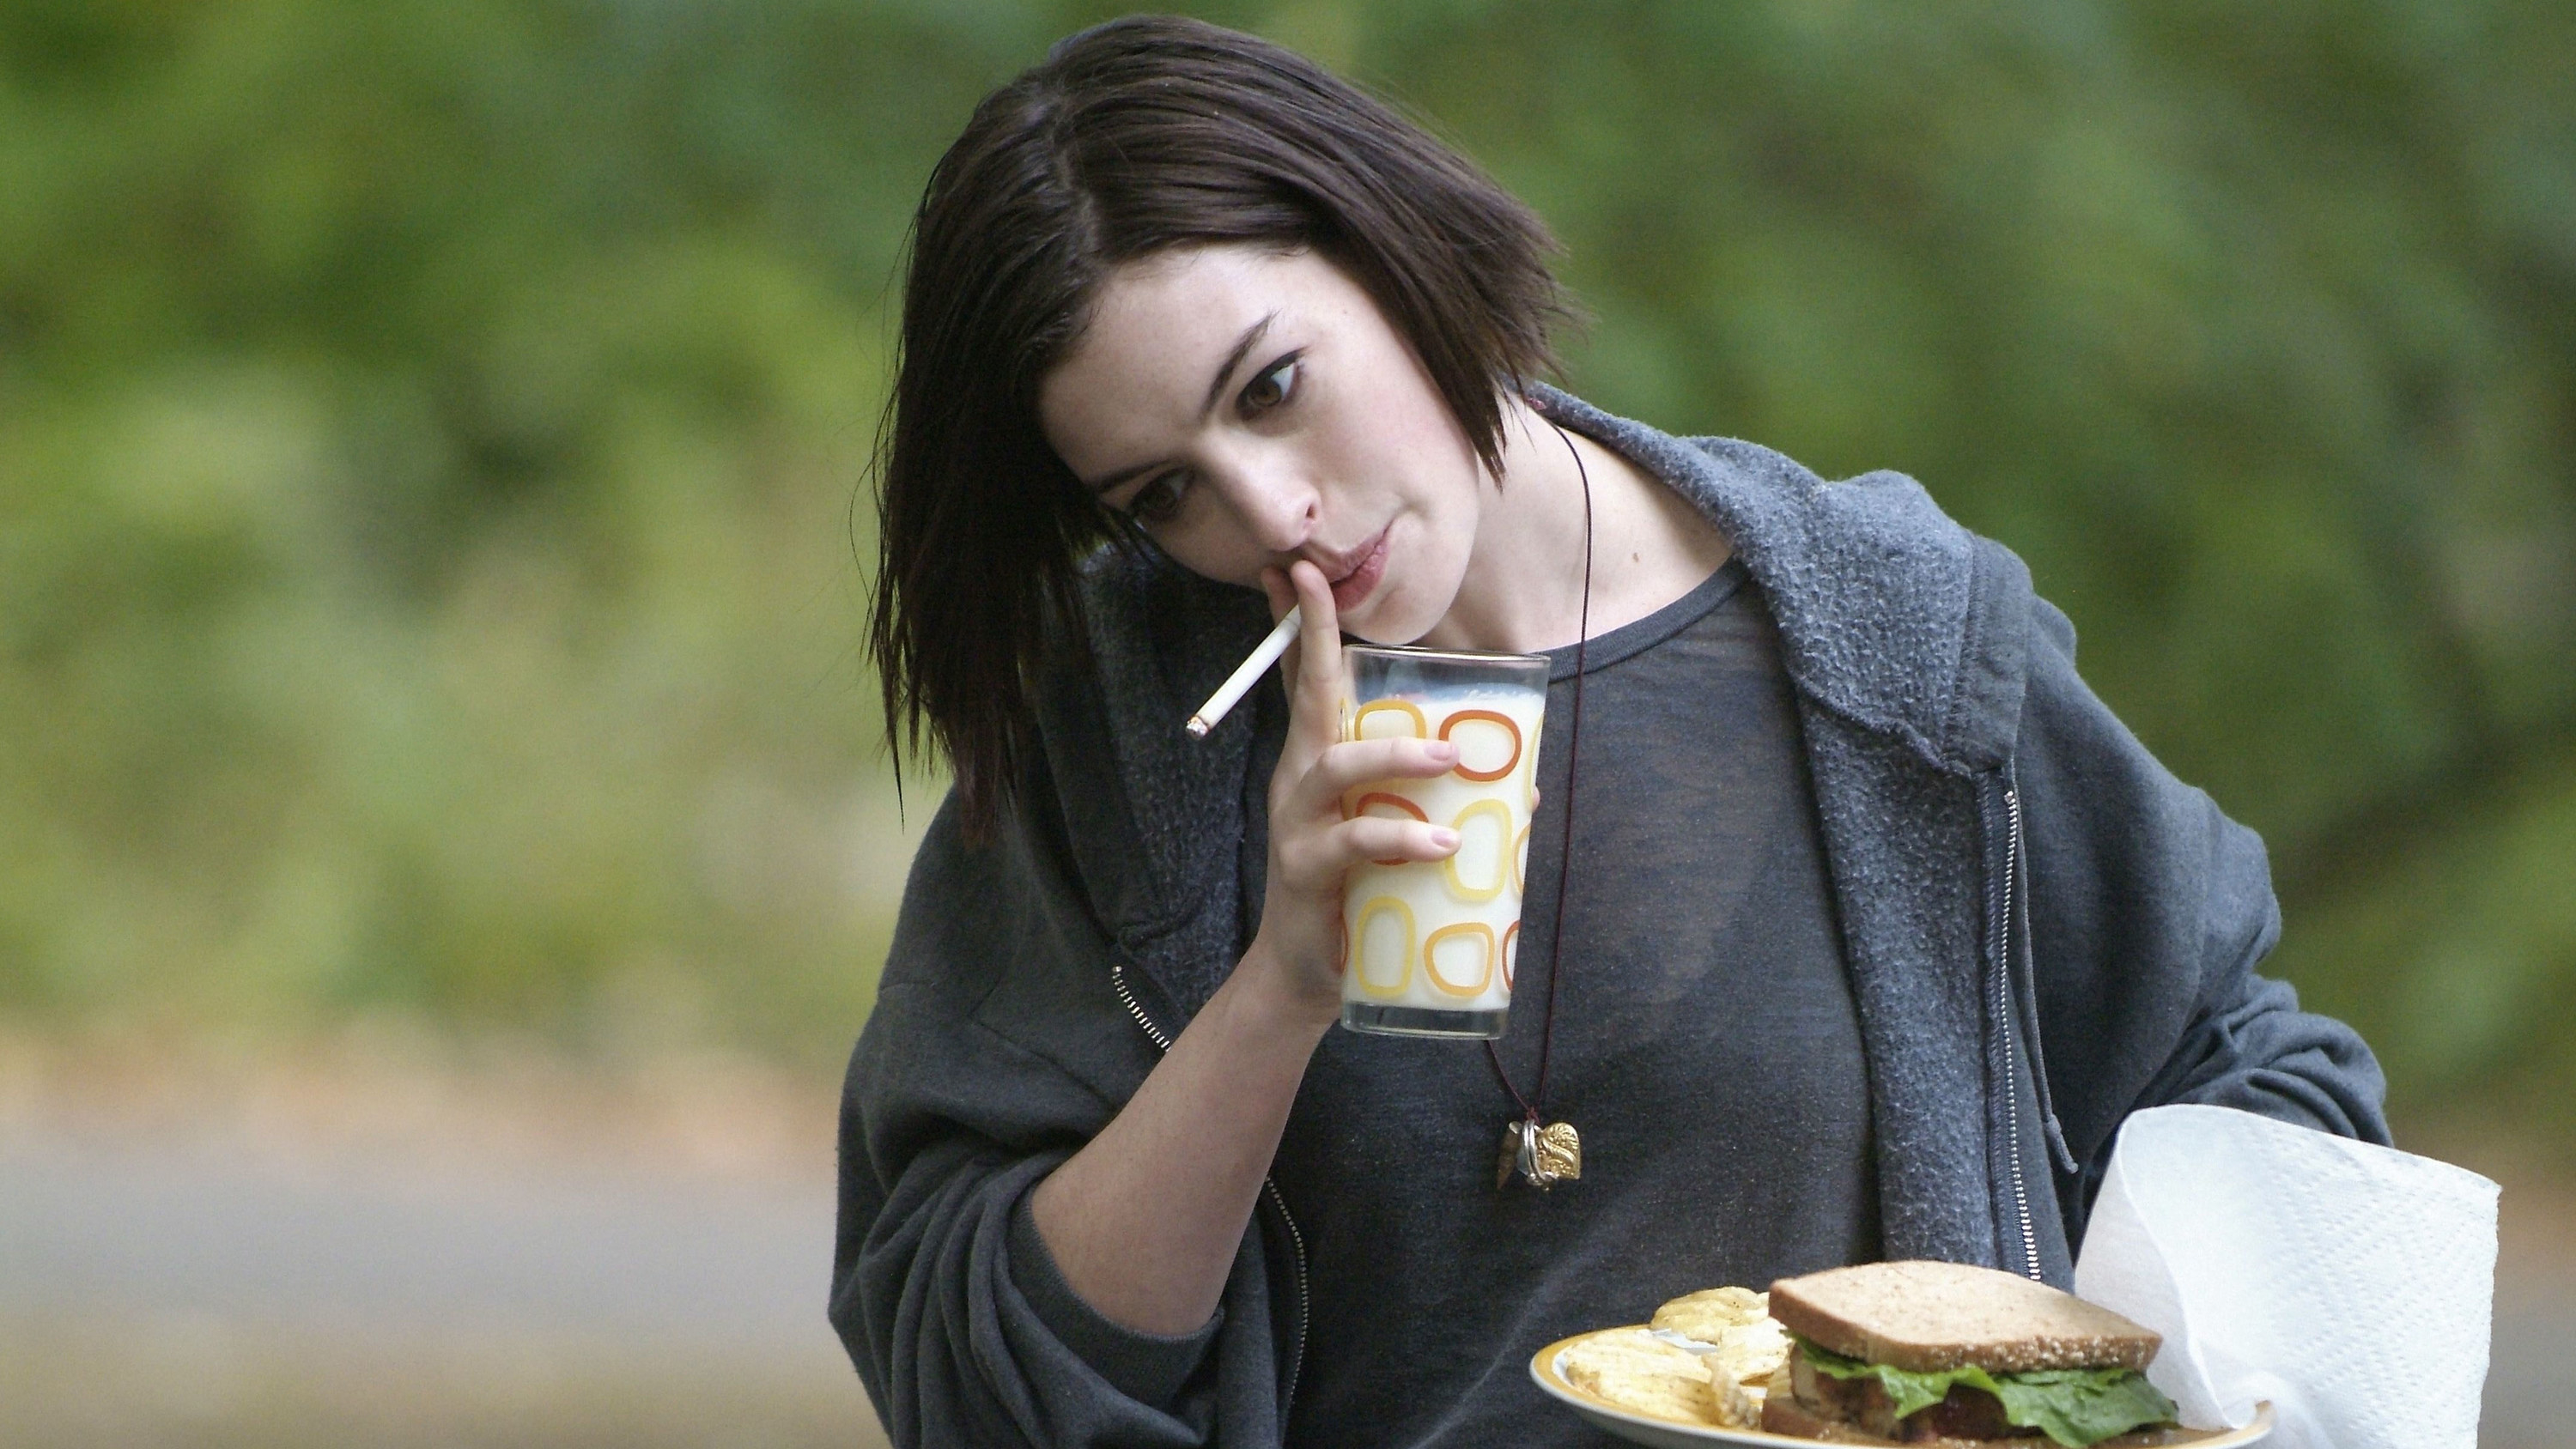 Anne Hathaway smokes and caries a plate with a sandwich on it